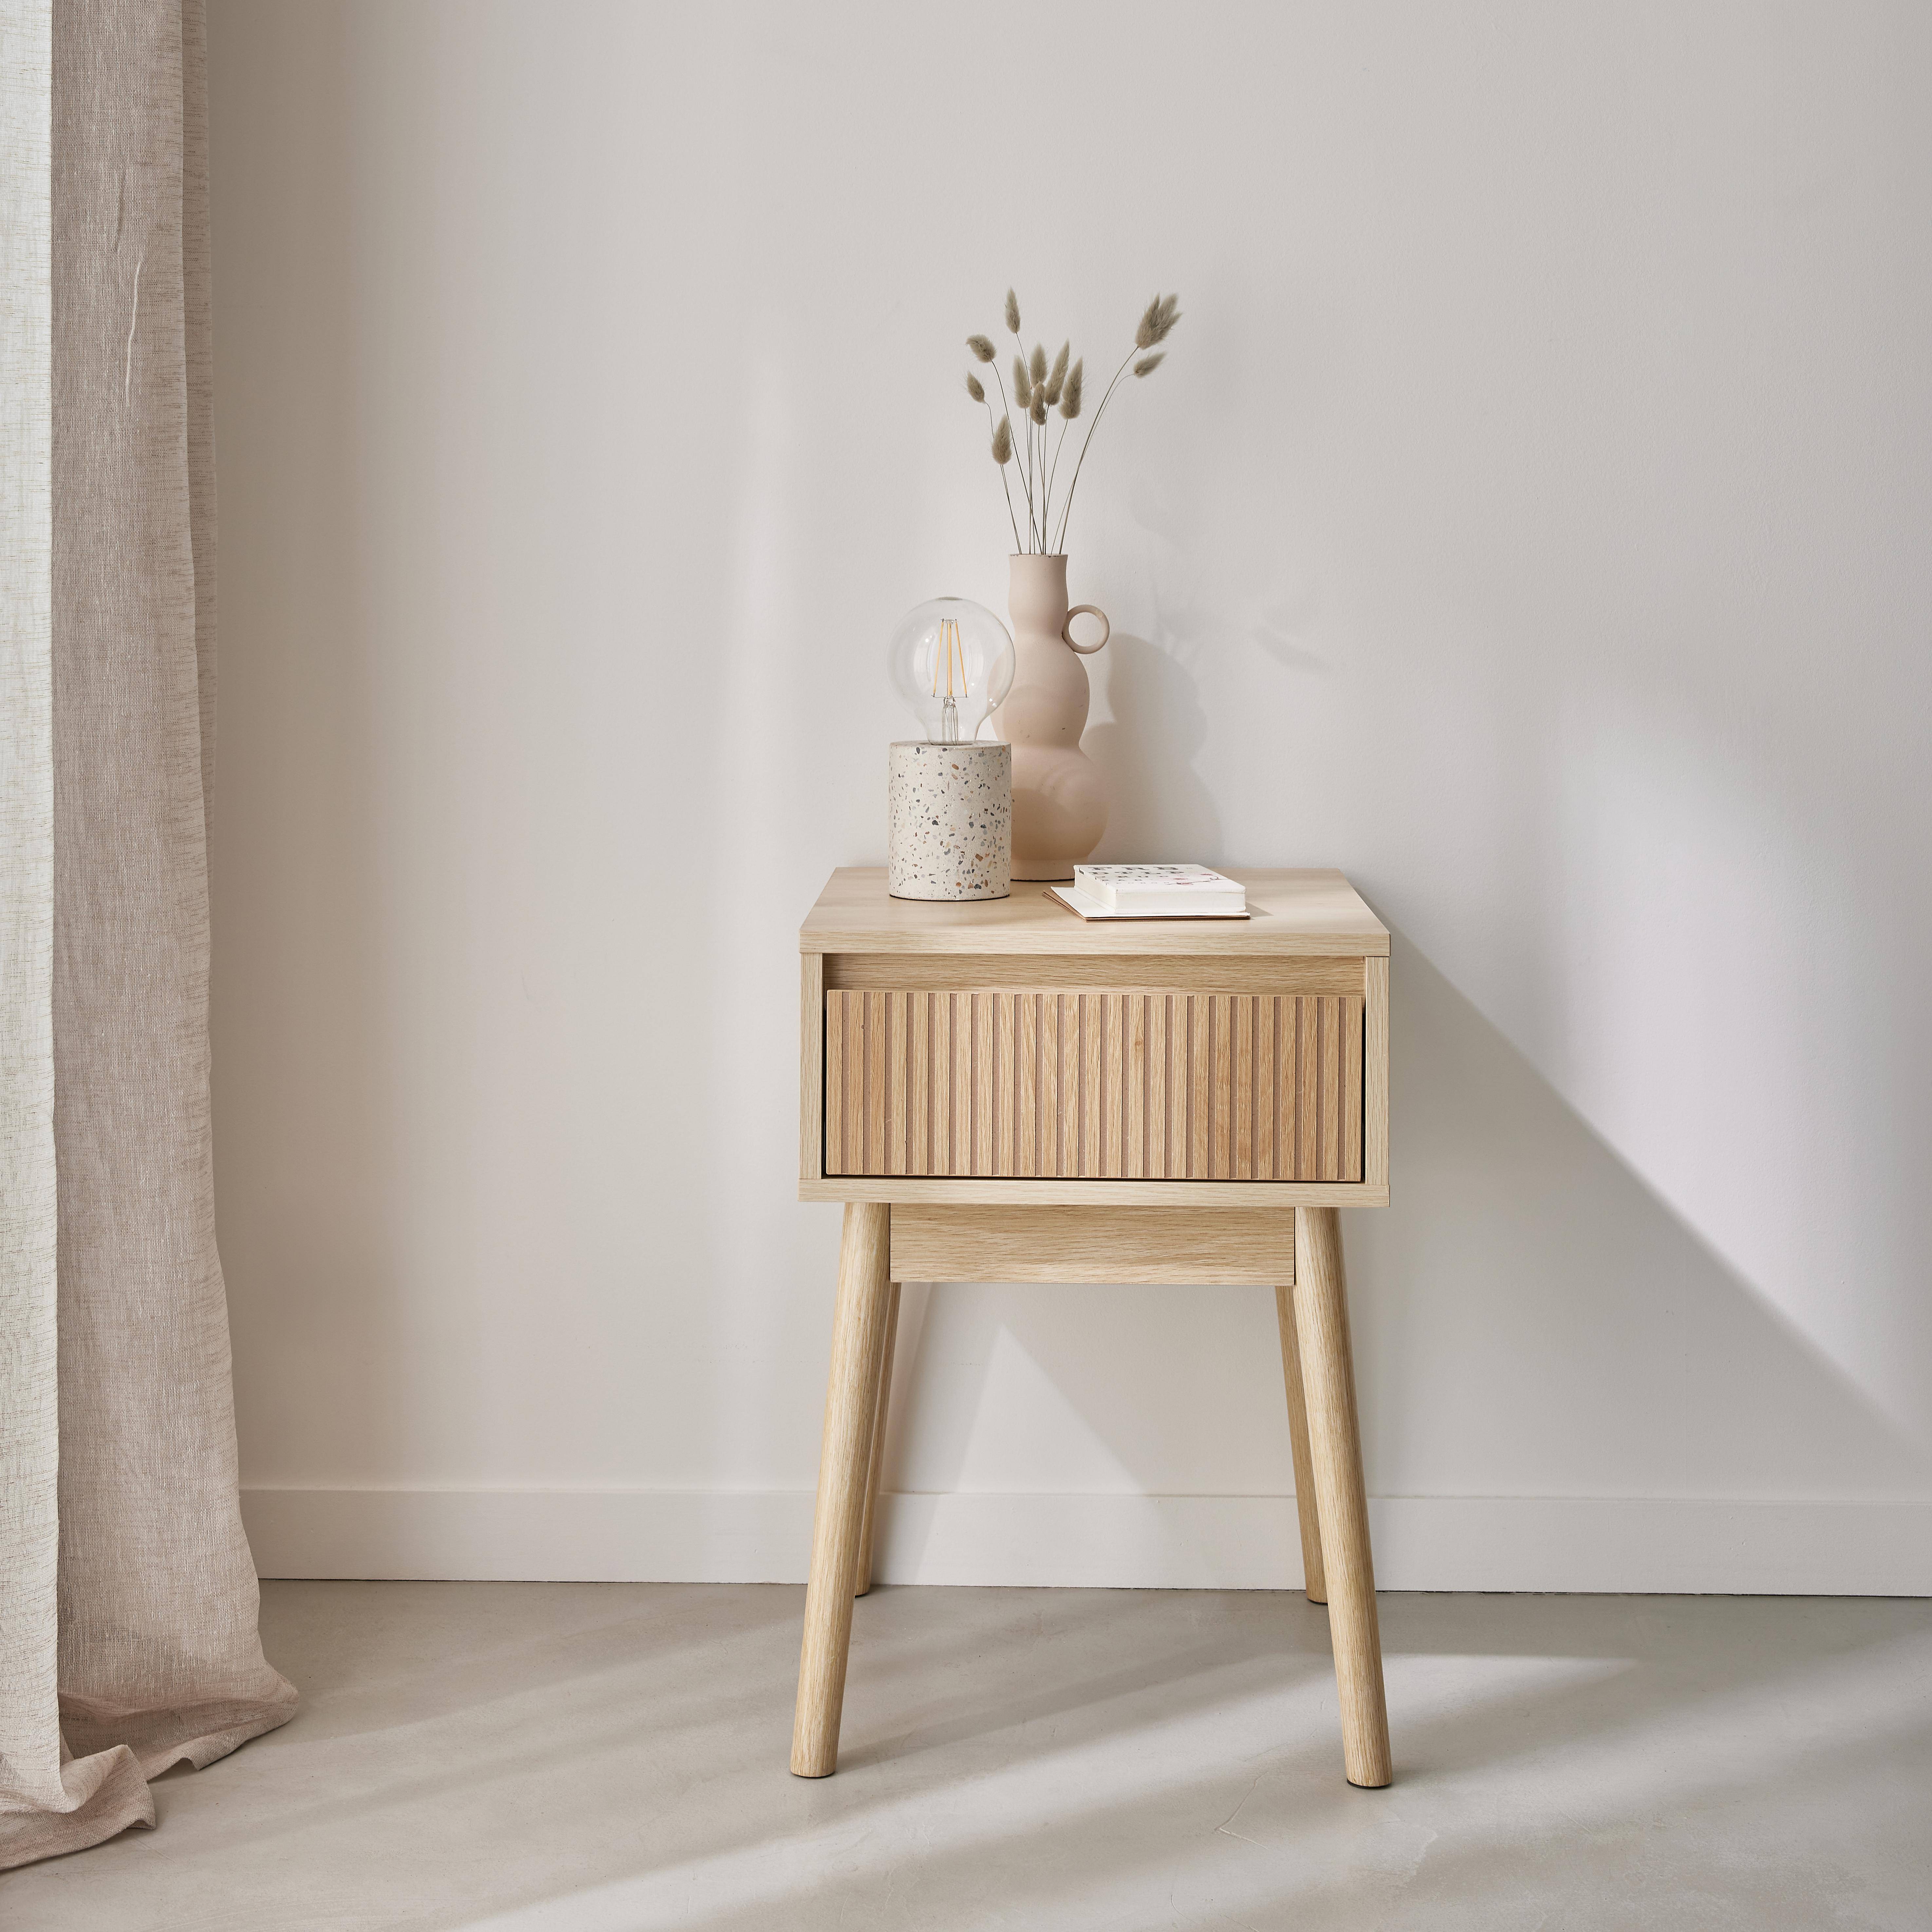 Bedside table with one drawer. Natural colour laminate panels. Fir wood legs.  W 39 x 39 x H 55.4cm LINEAR,sweeek,Photo1